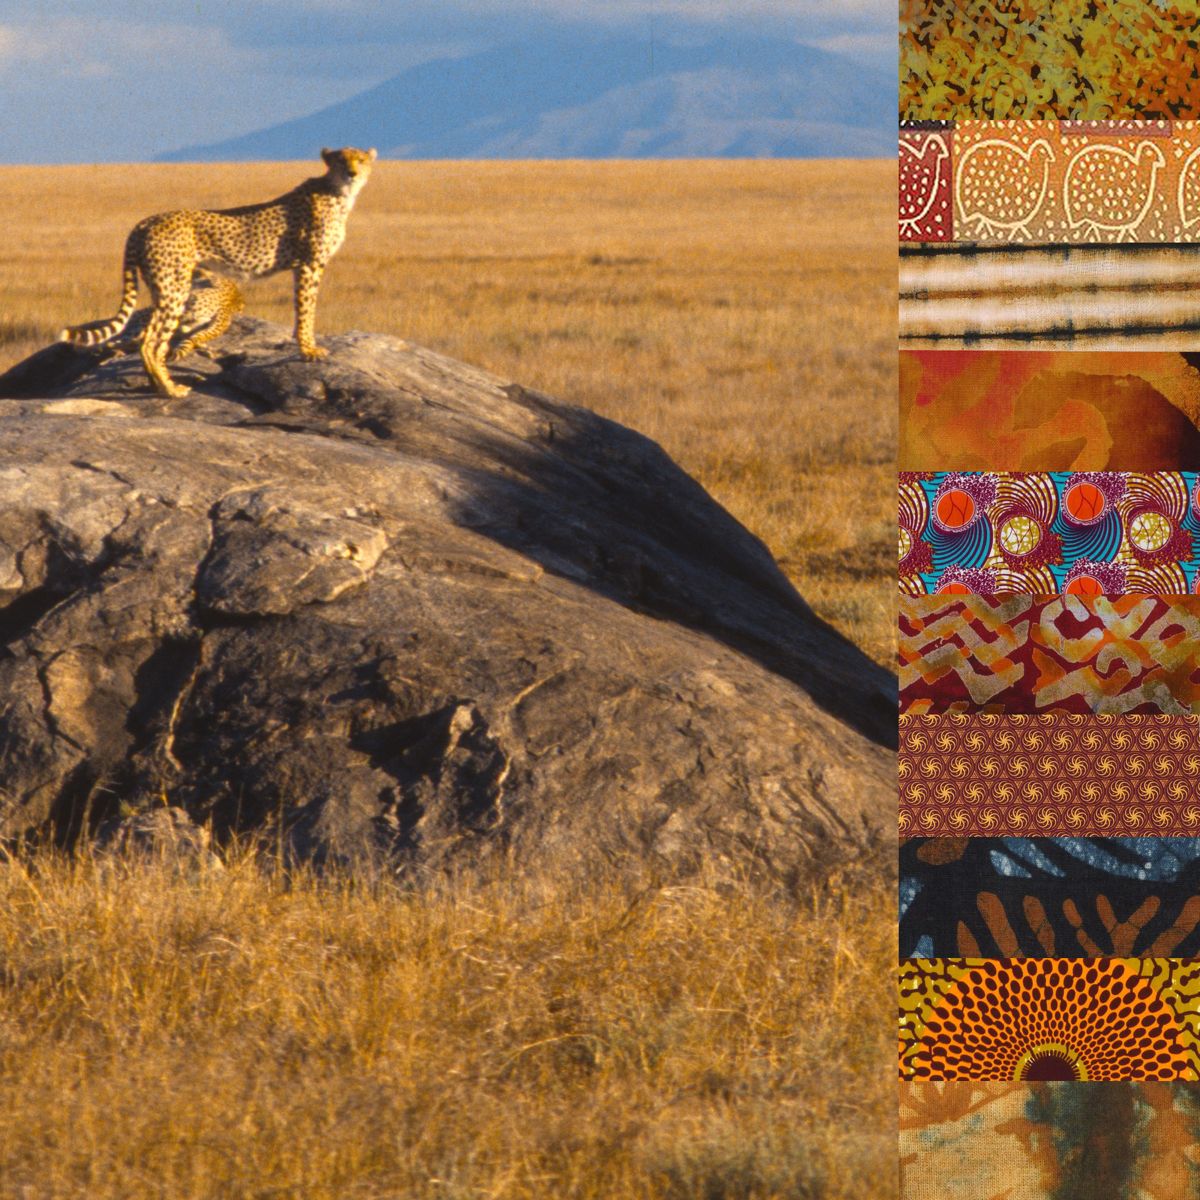 African Savanna Hand Embroidery Kit, Pre Printed Embroidery Fabric